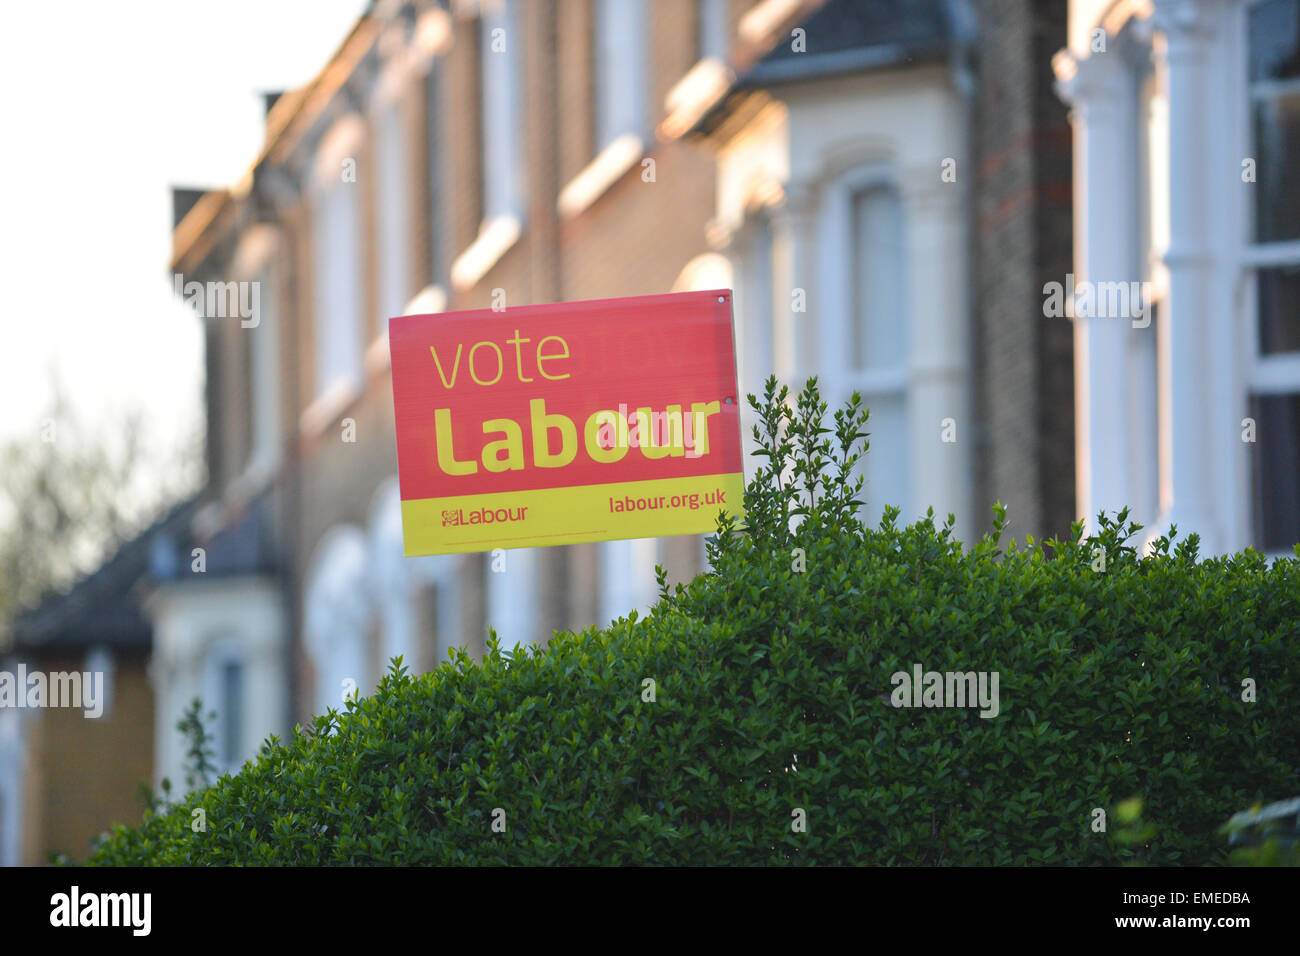 Stroud Green, London, UK. 20th April 2015. General Election banners and posters in the Stroud Green area. Lynne Featherstone (LibDems) is fighting to retain the seat. Credit:  Matthew Chattle/Alamy Live News Stock Photo